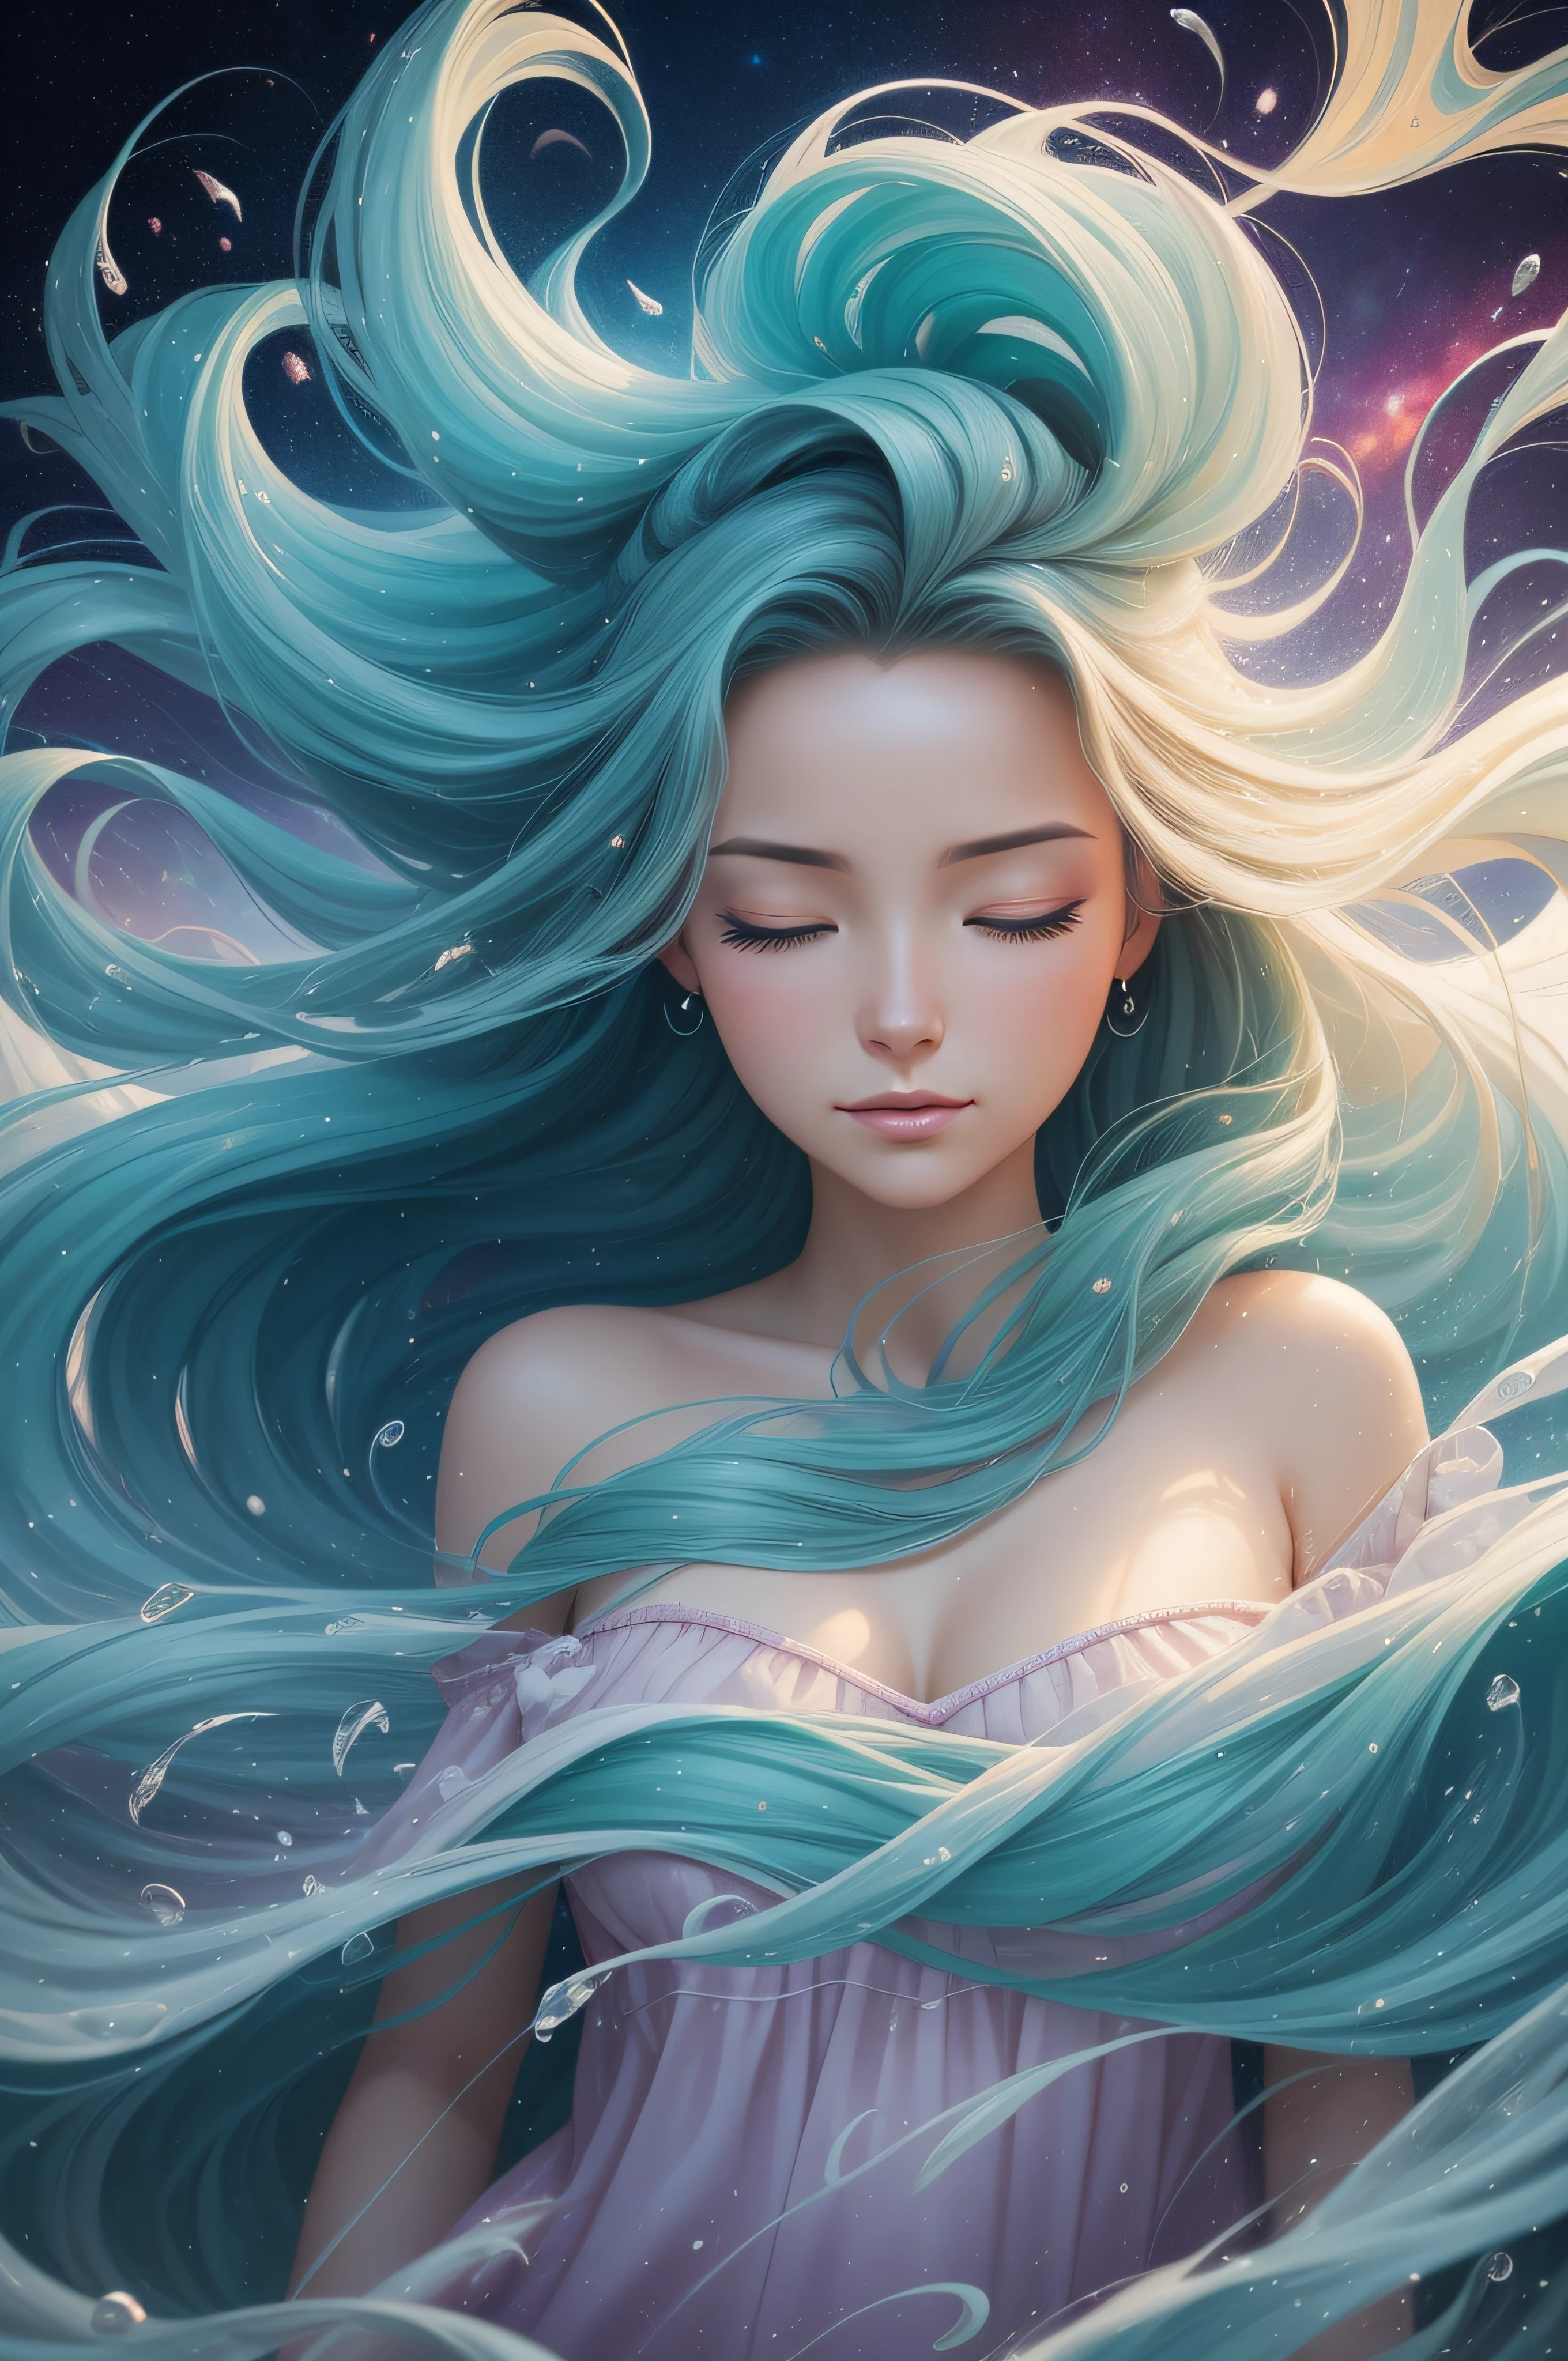 painting of a woman with her eyes closed and her hair blowing in the wind, softly swirling magical energy, channeling swirling energy, swirling magical energy, swirling water cosmos, by Cyril Rolando, swirling flows of energy, in the astral plane ) ) ), dreamlike digital painting, inspired by Cyril Rolando, ' lost in a lucid dream, dreaming face